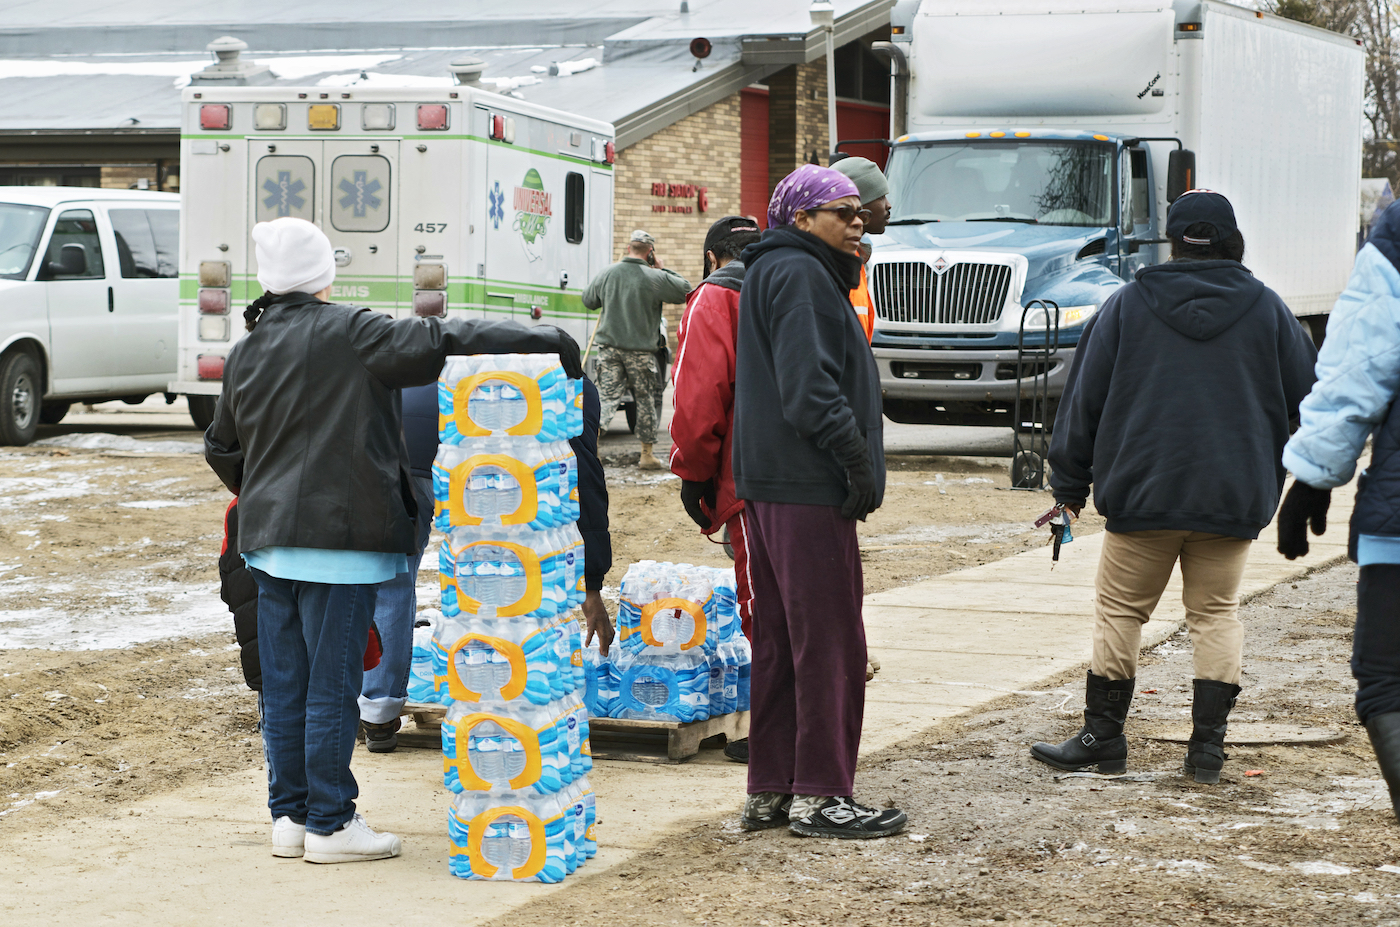 A few people standing around cases of bottled water outside a fire station.